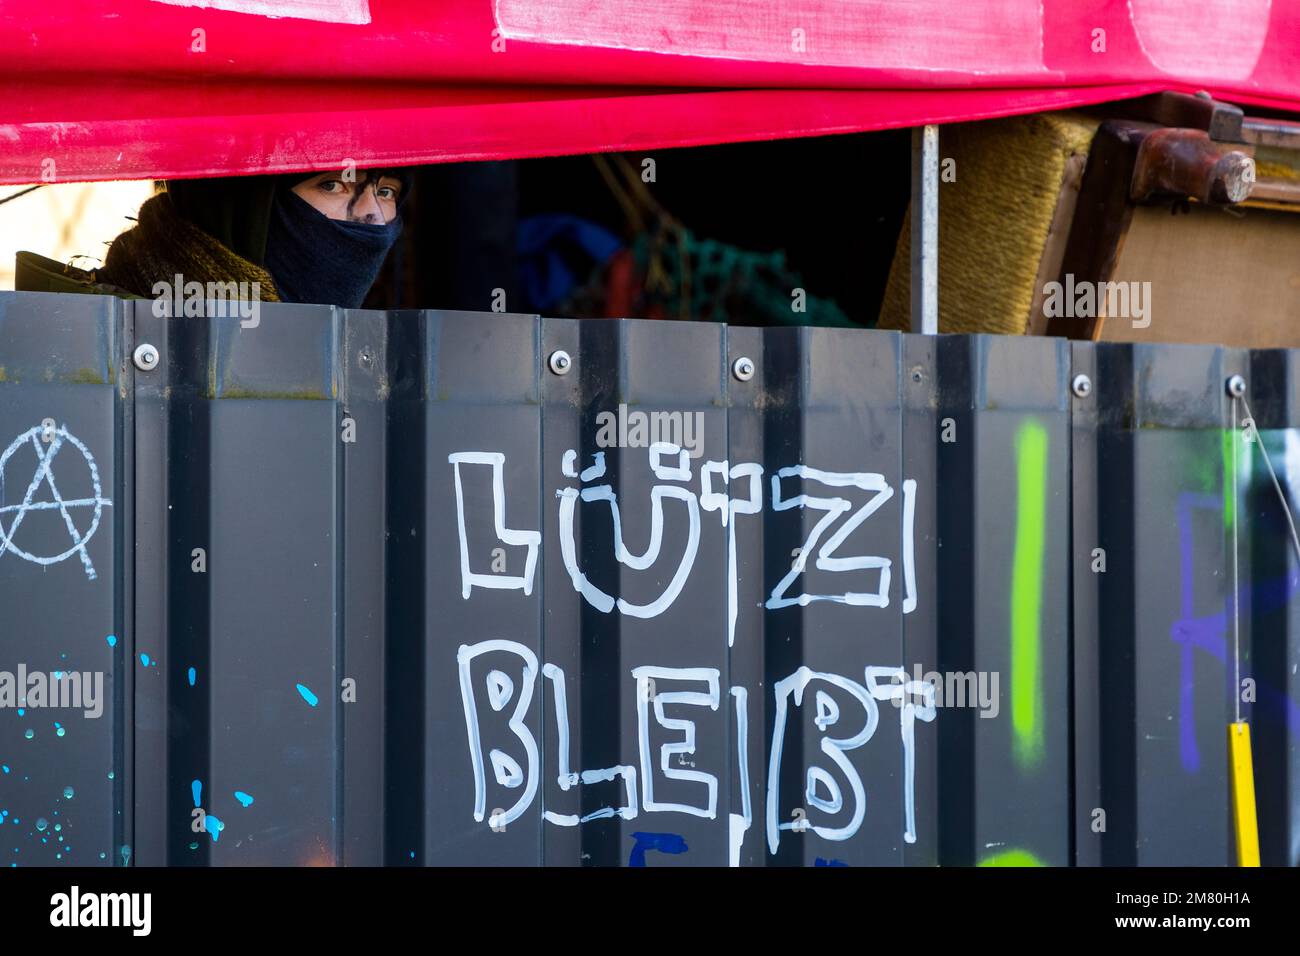 Climate activists have barricaded themselves in the German lignite village of Lutzerath in North Rhine-Westphalia. The activists have been occupying the village for more than two years to prevent it from disappearing from the face of the earth, as agreed in a deal negotiated by political leaders. Energy company RWE mines lignite there, which activists blame for global warming and CO2 pollution. Early this morning, police began evacuating the village. Stock Photo